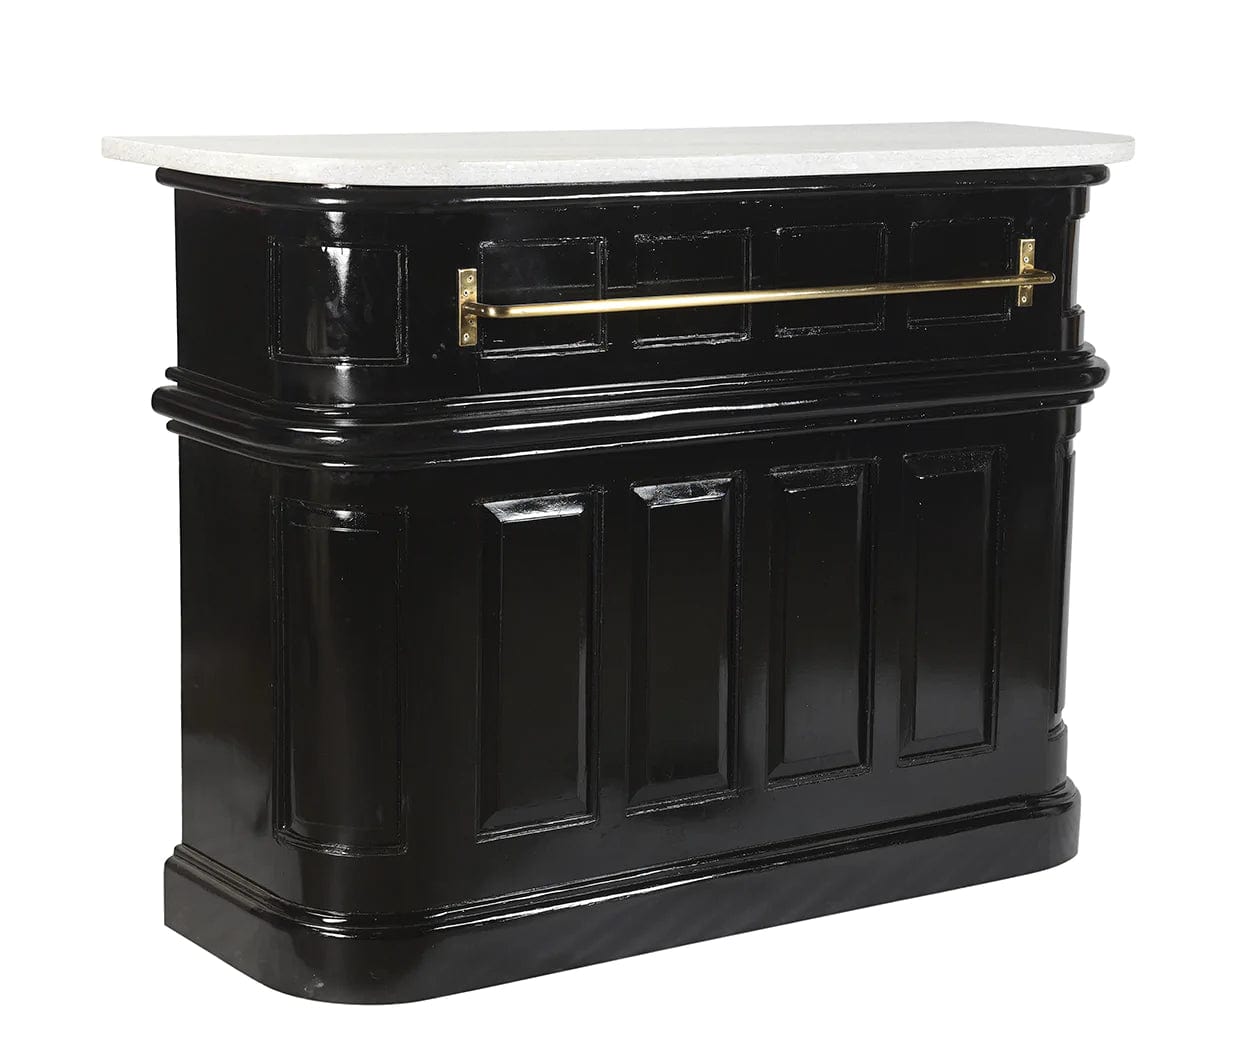 White marble top and brass handle shown on front of bar